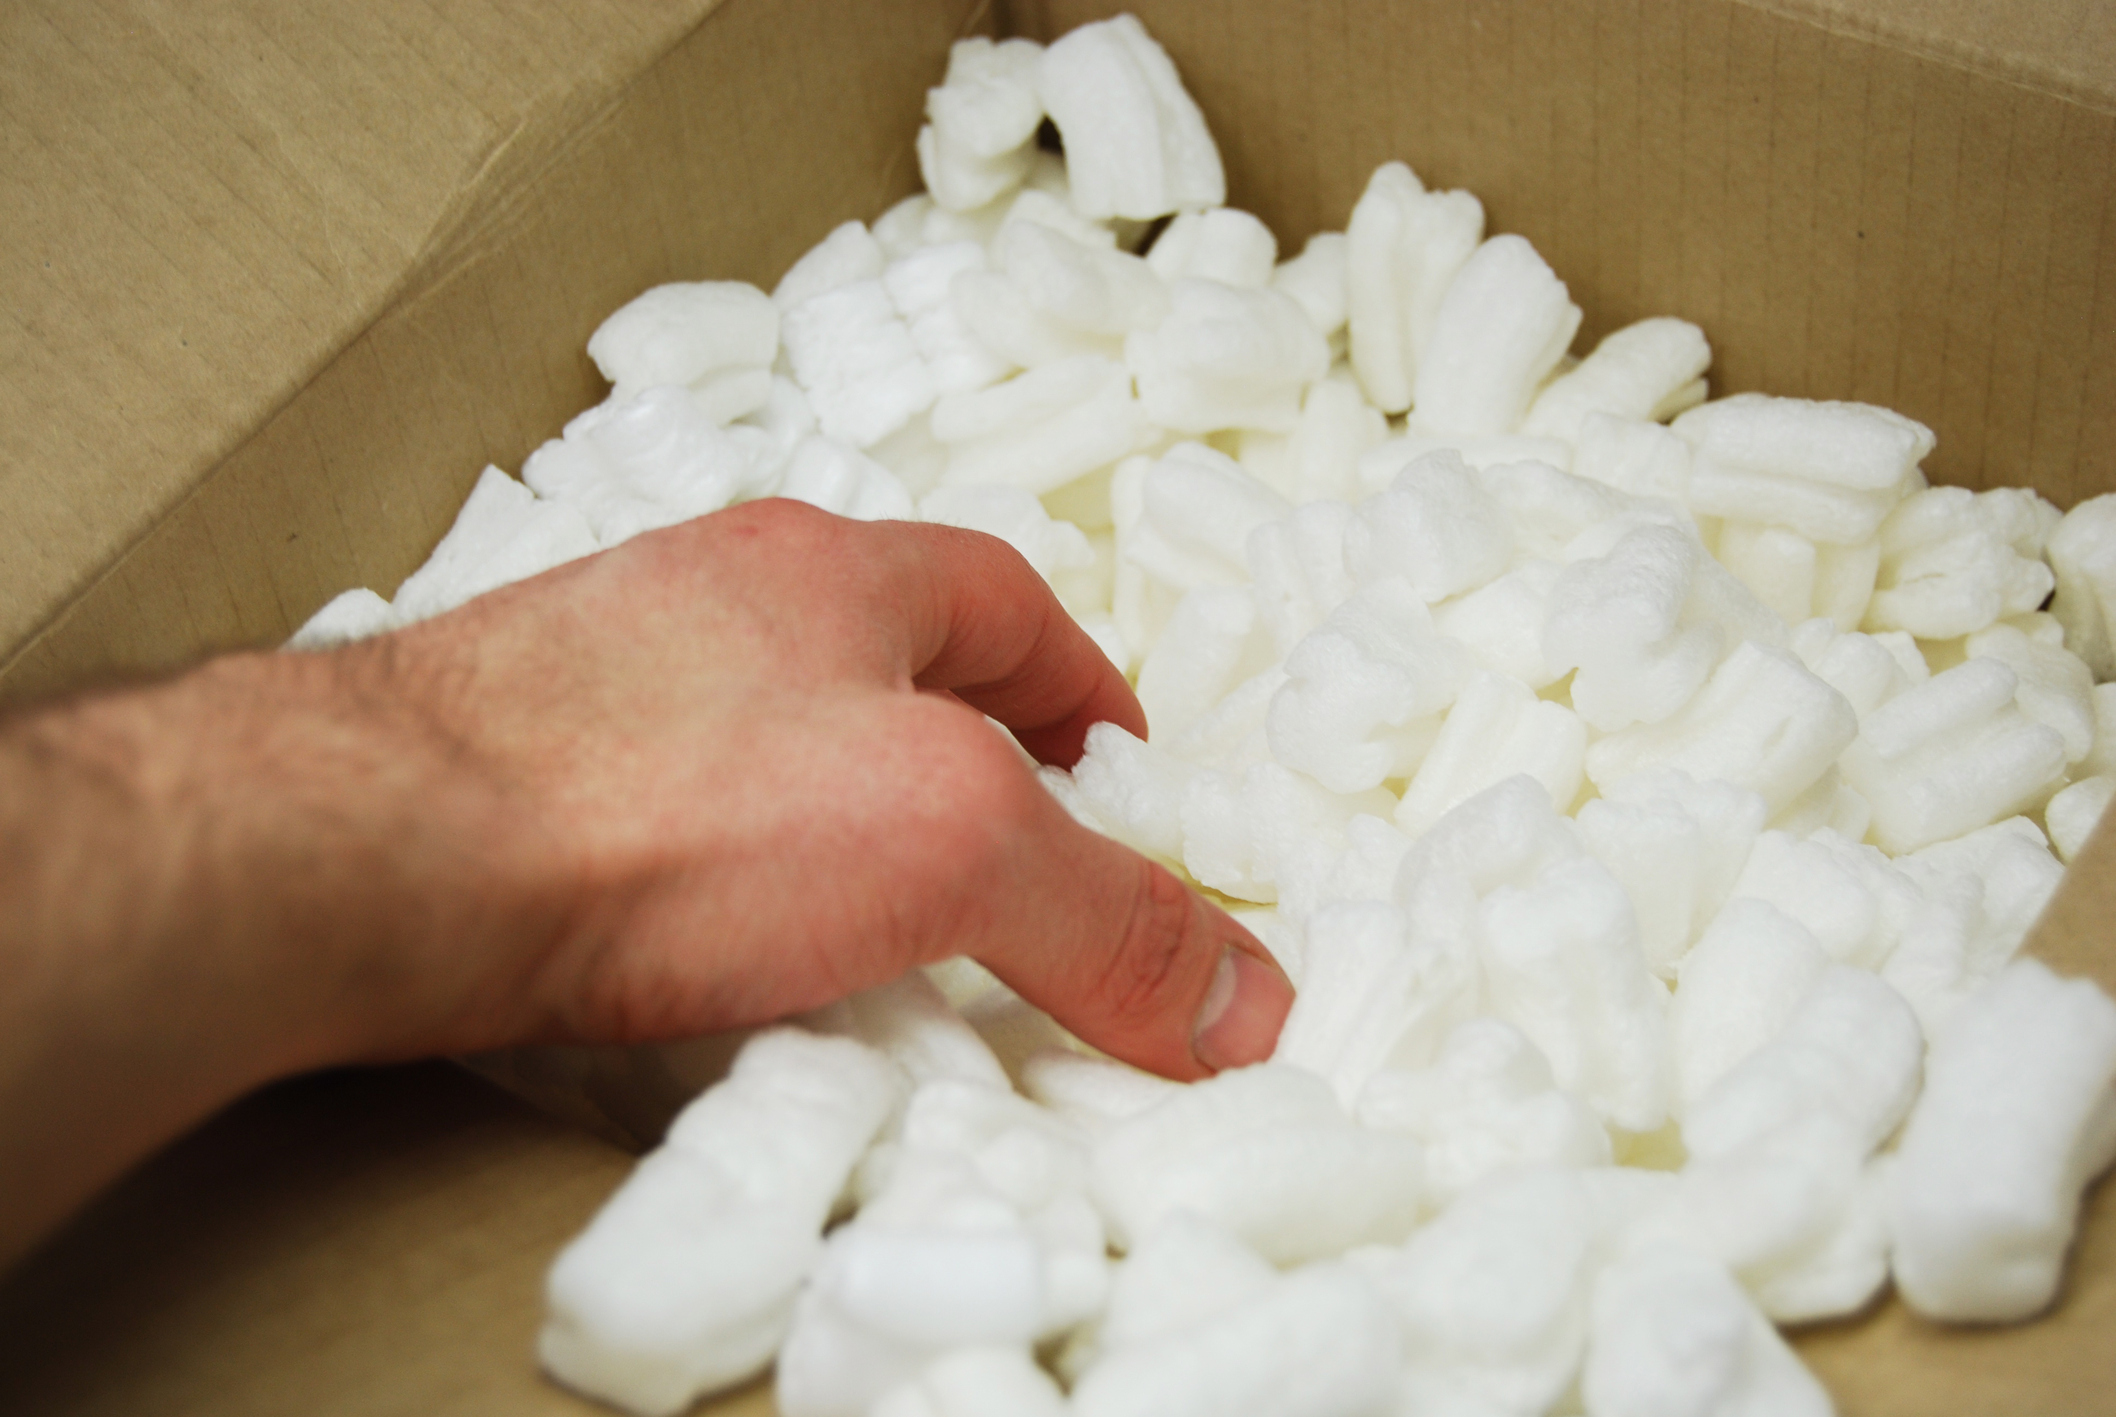 can you eat packing peanuts?